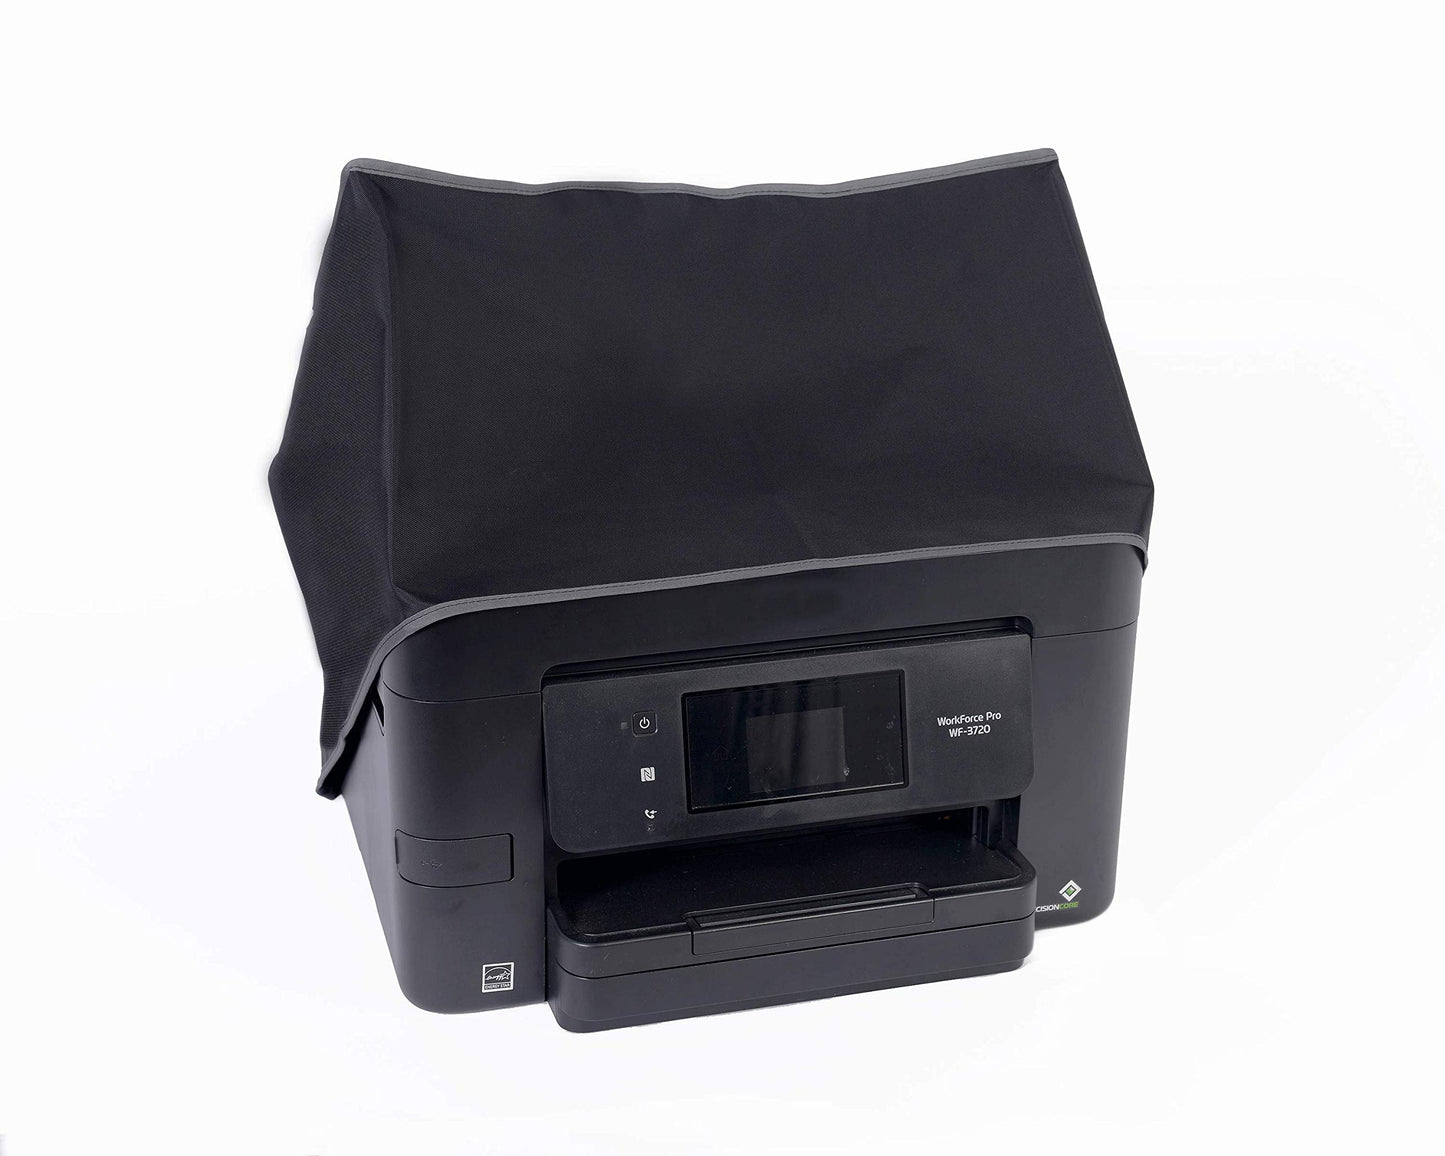 The Perfect Dust Cover, Black Nylon Cover for HP DesignJet T120 / T125 / T130 24''-in Wide Format Printer, Anti Static Waterproof, Dimensions 38.9''W x 20.9''D x 11.2''H by The Perfect Dust Cover LLC